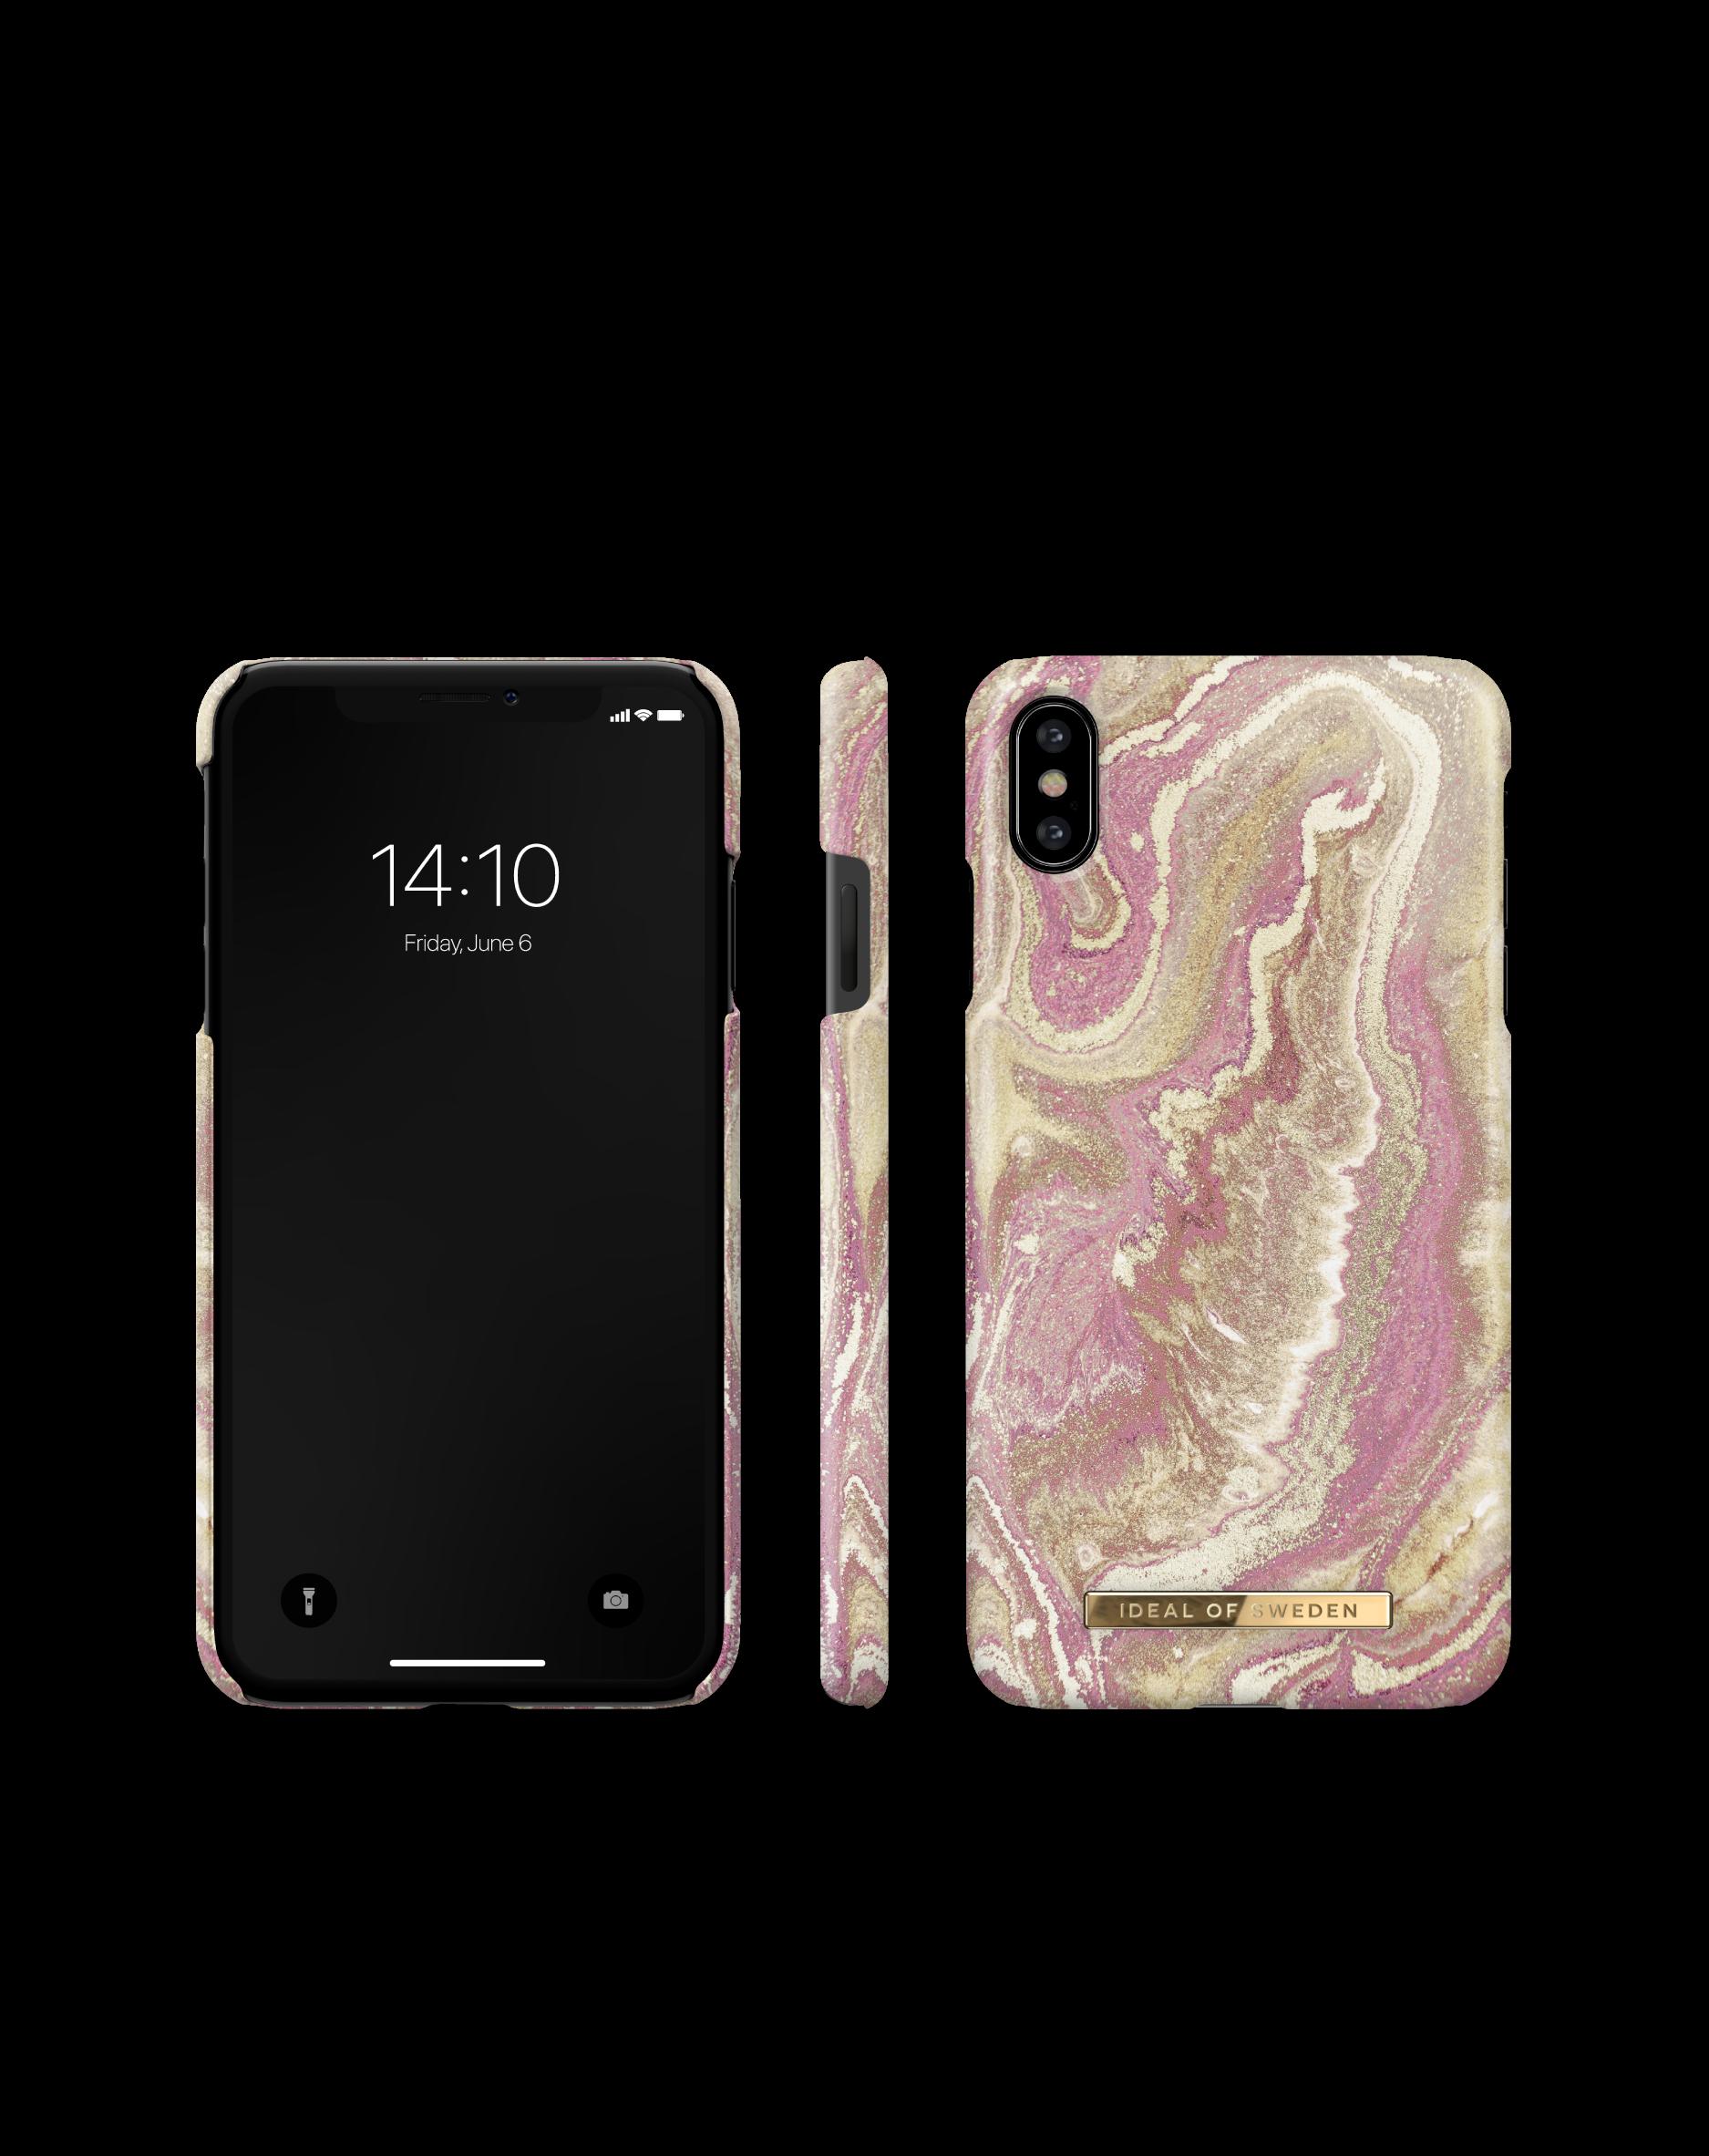 IDEAL OF SWEDEN IDFCSS19-IXS-120, Backcover, Apple, X/XS, Golden Marble IPhone Blush